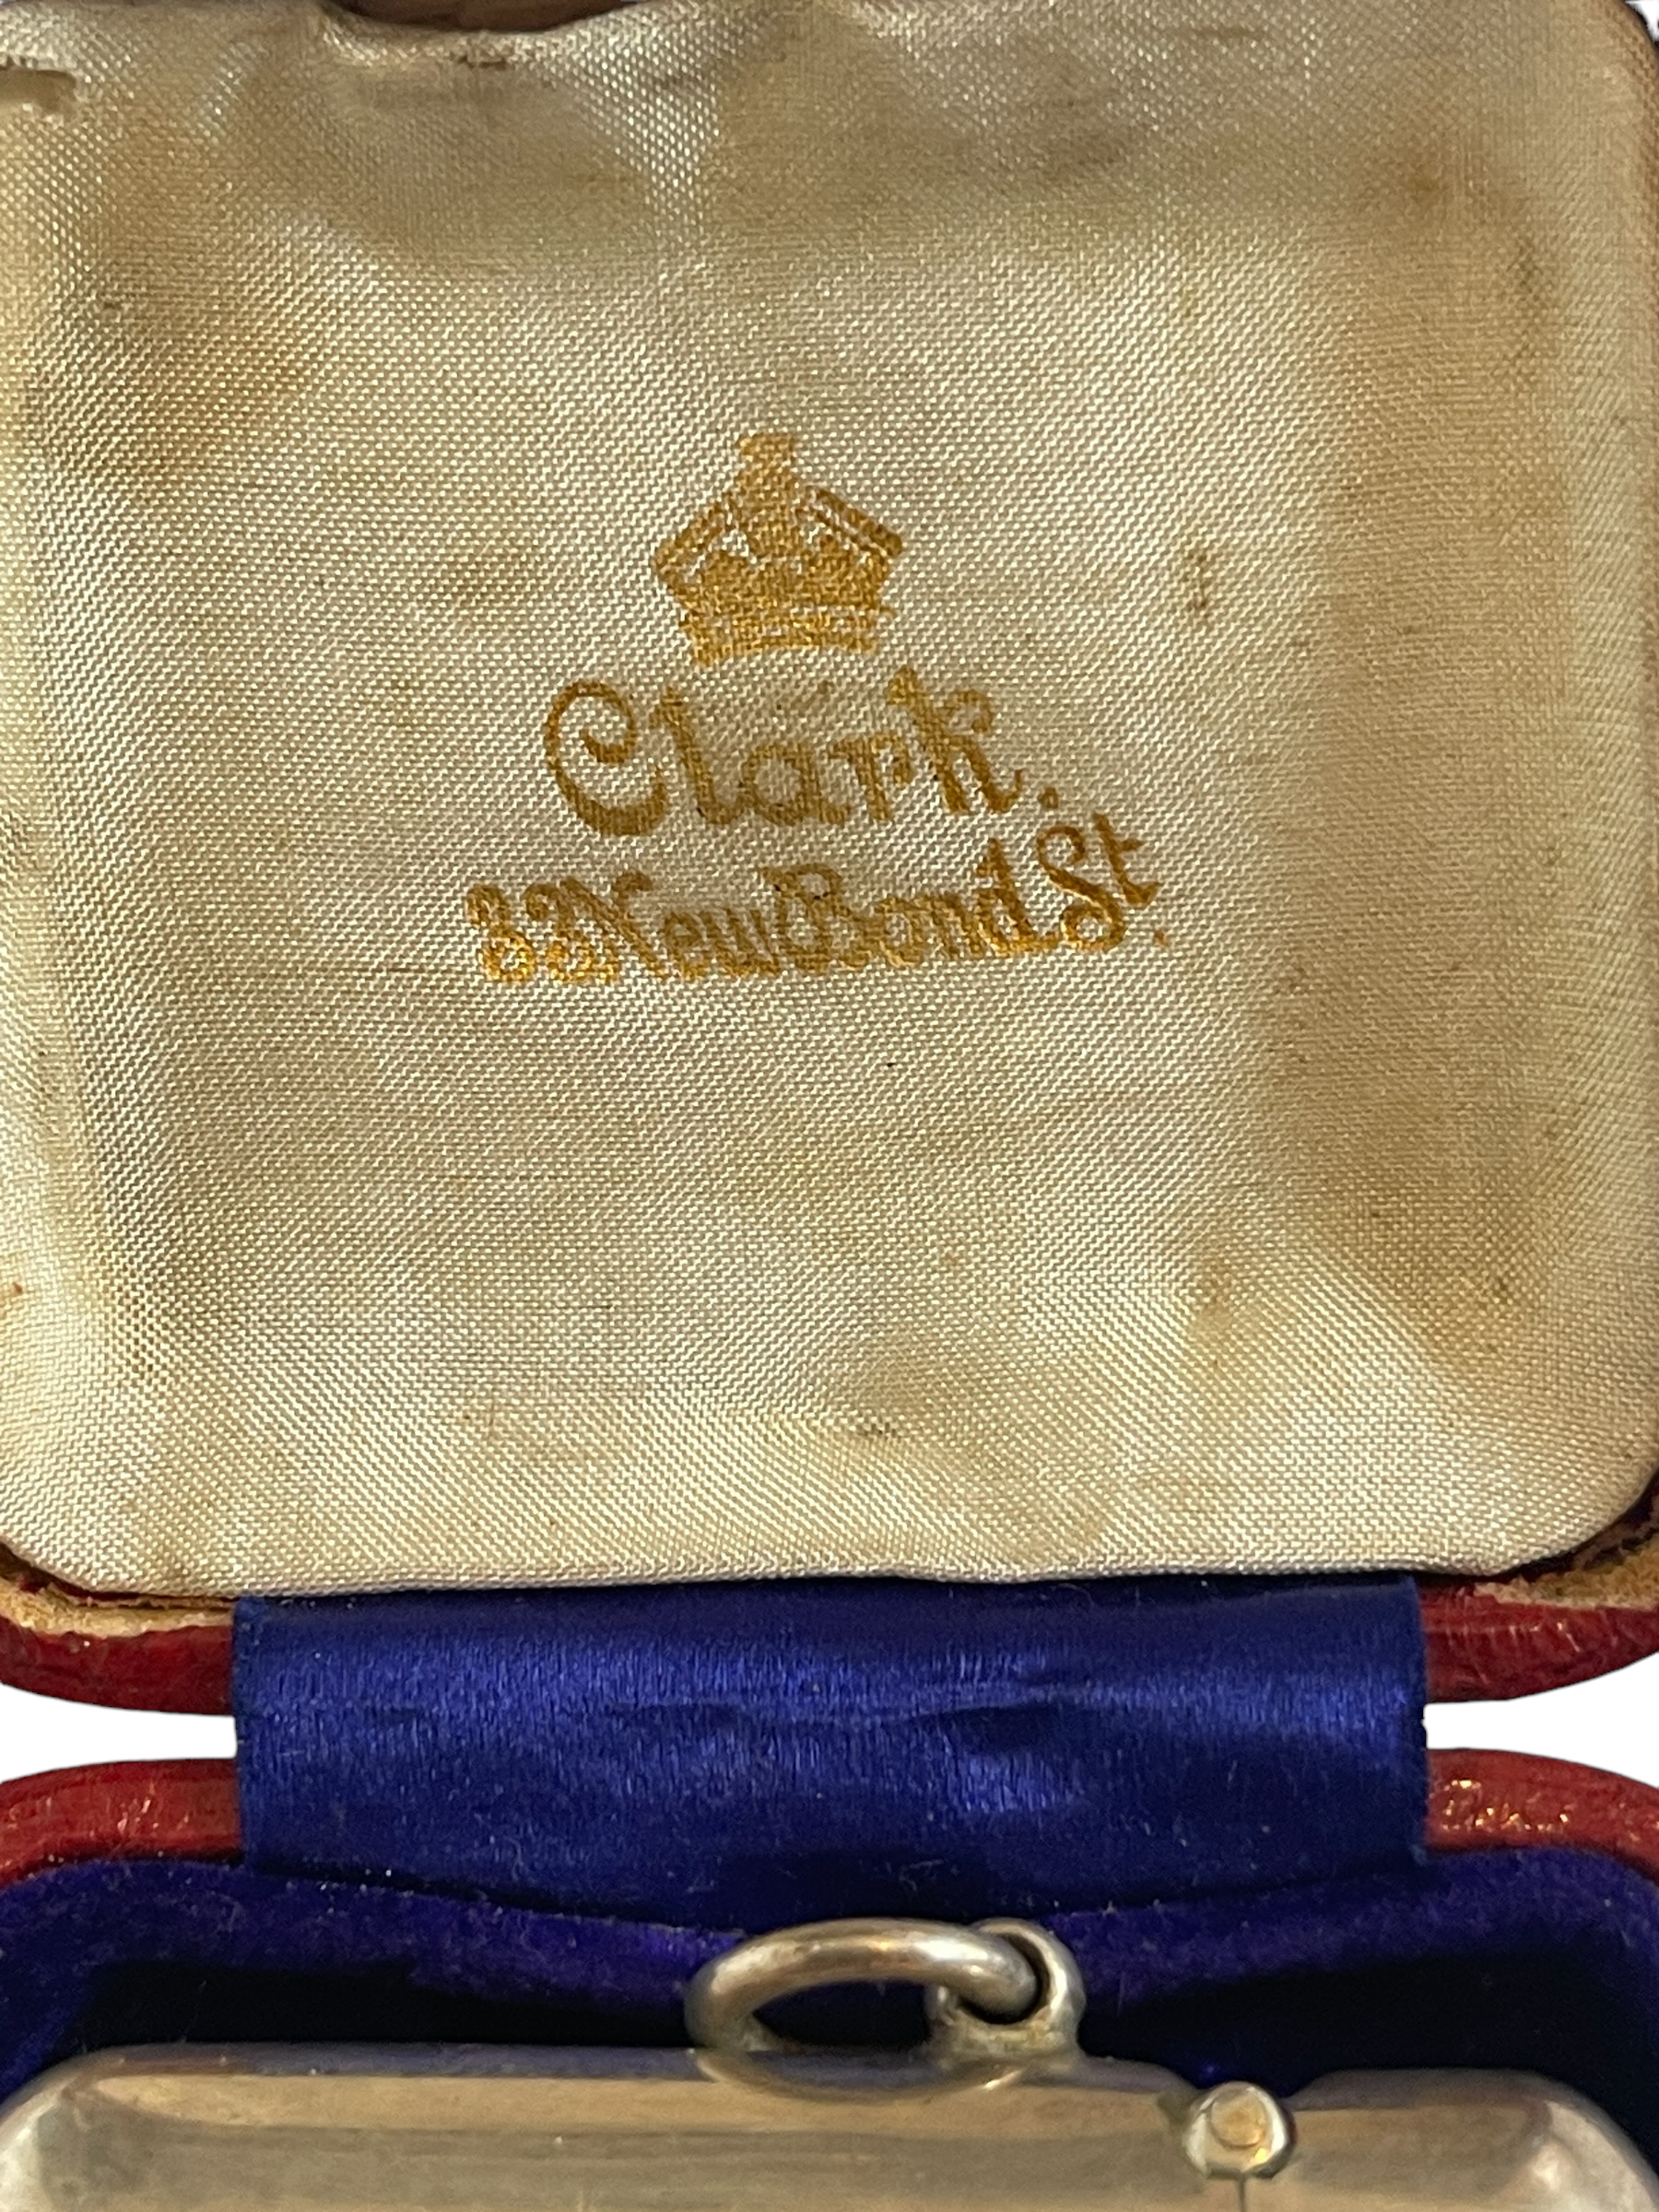 Alfred Clark New Bond St London Prince of Wales Feathers Cypher Boxed Vesta Case. - Image 2 of 13